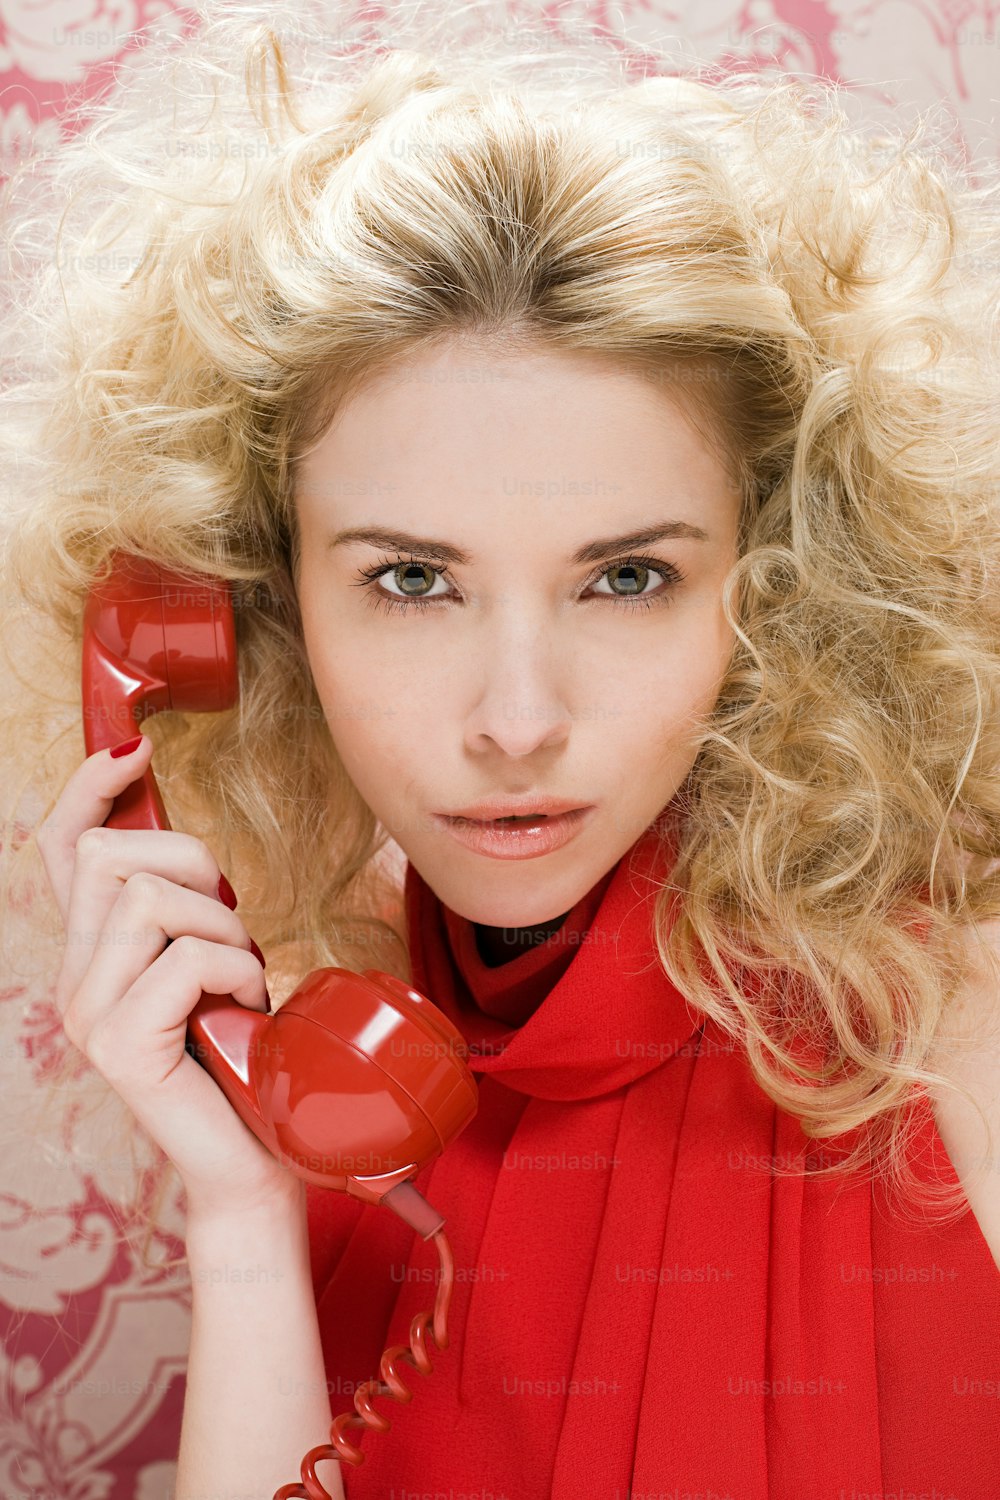 a woman in a red dress talking on a red phone